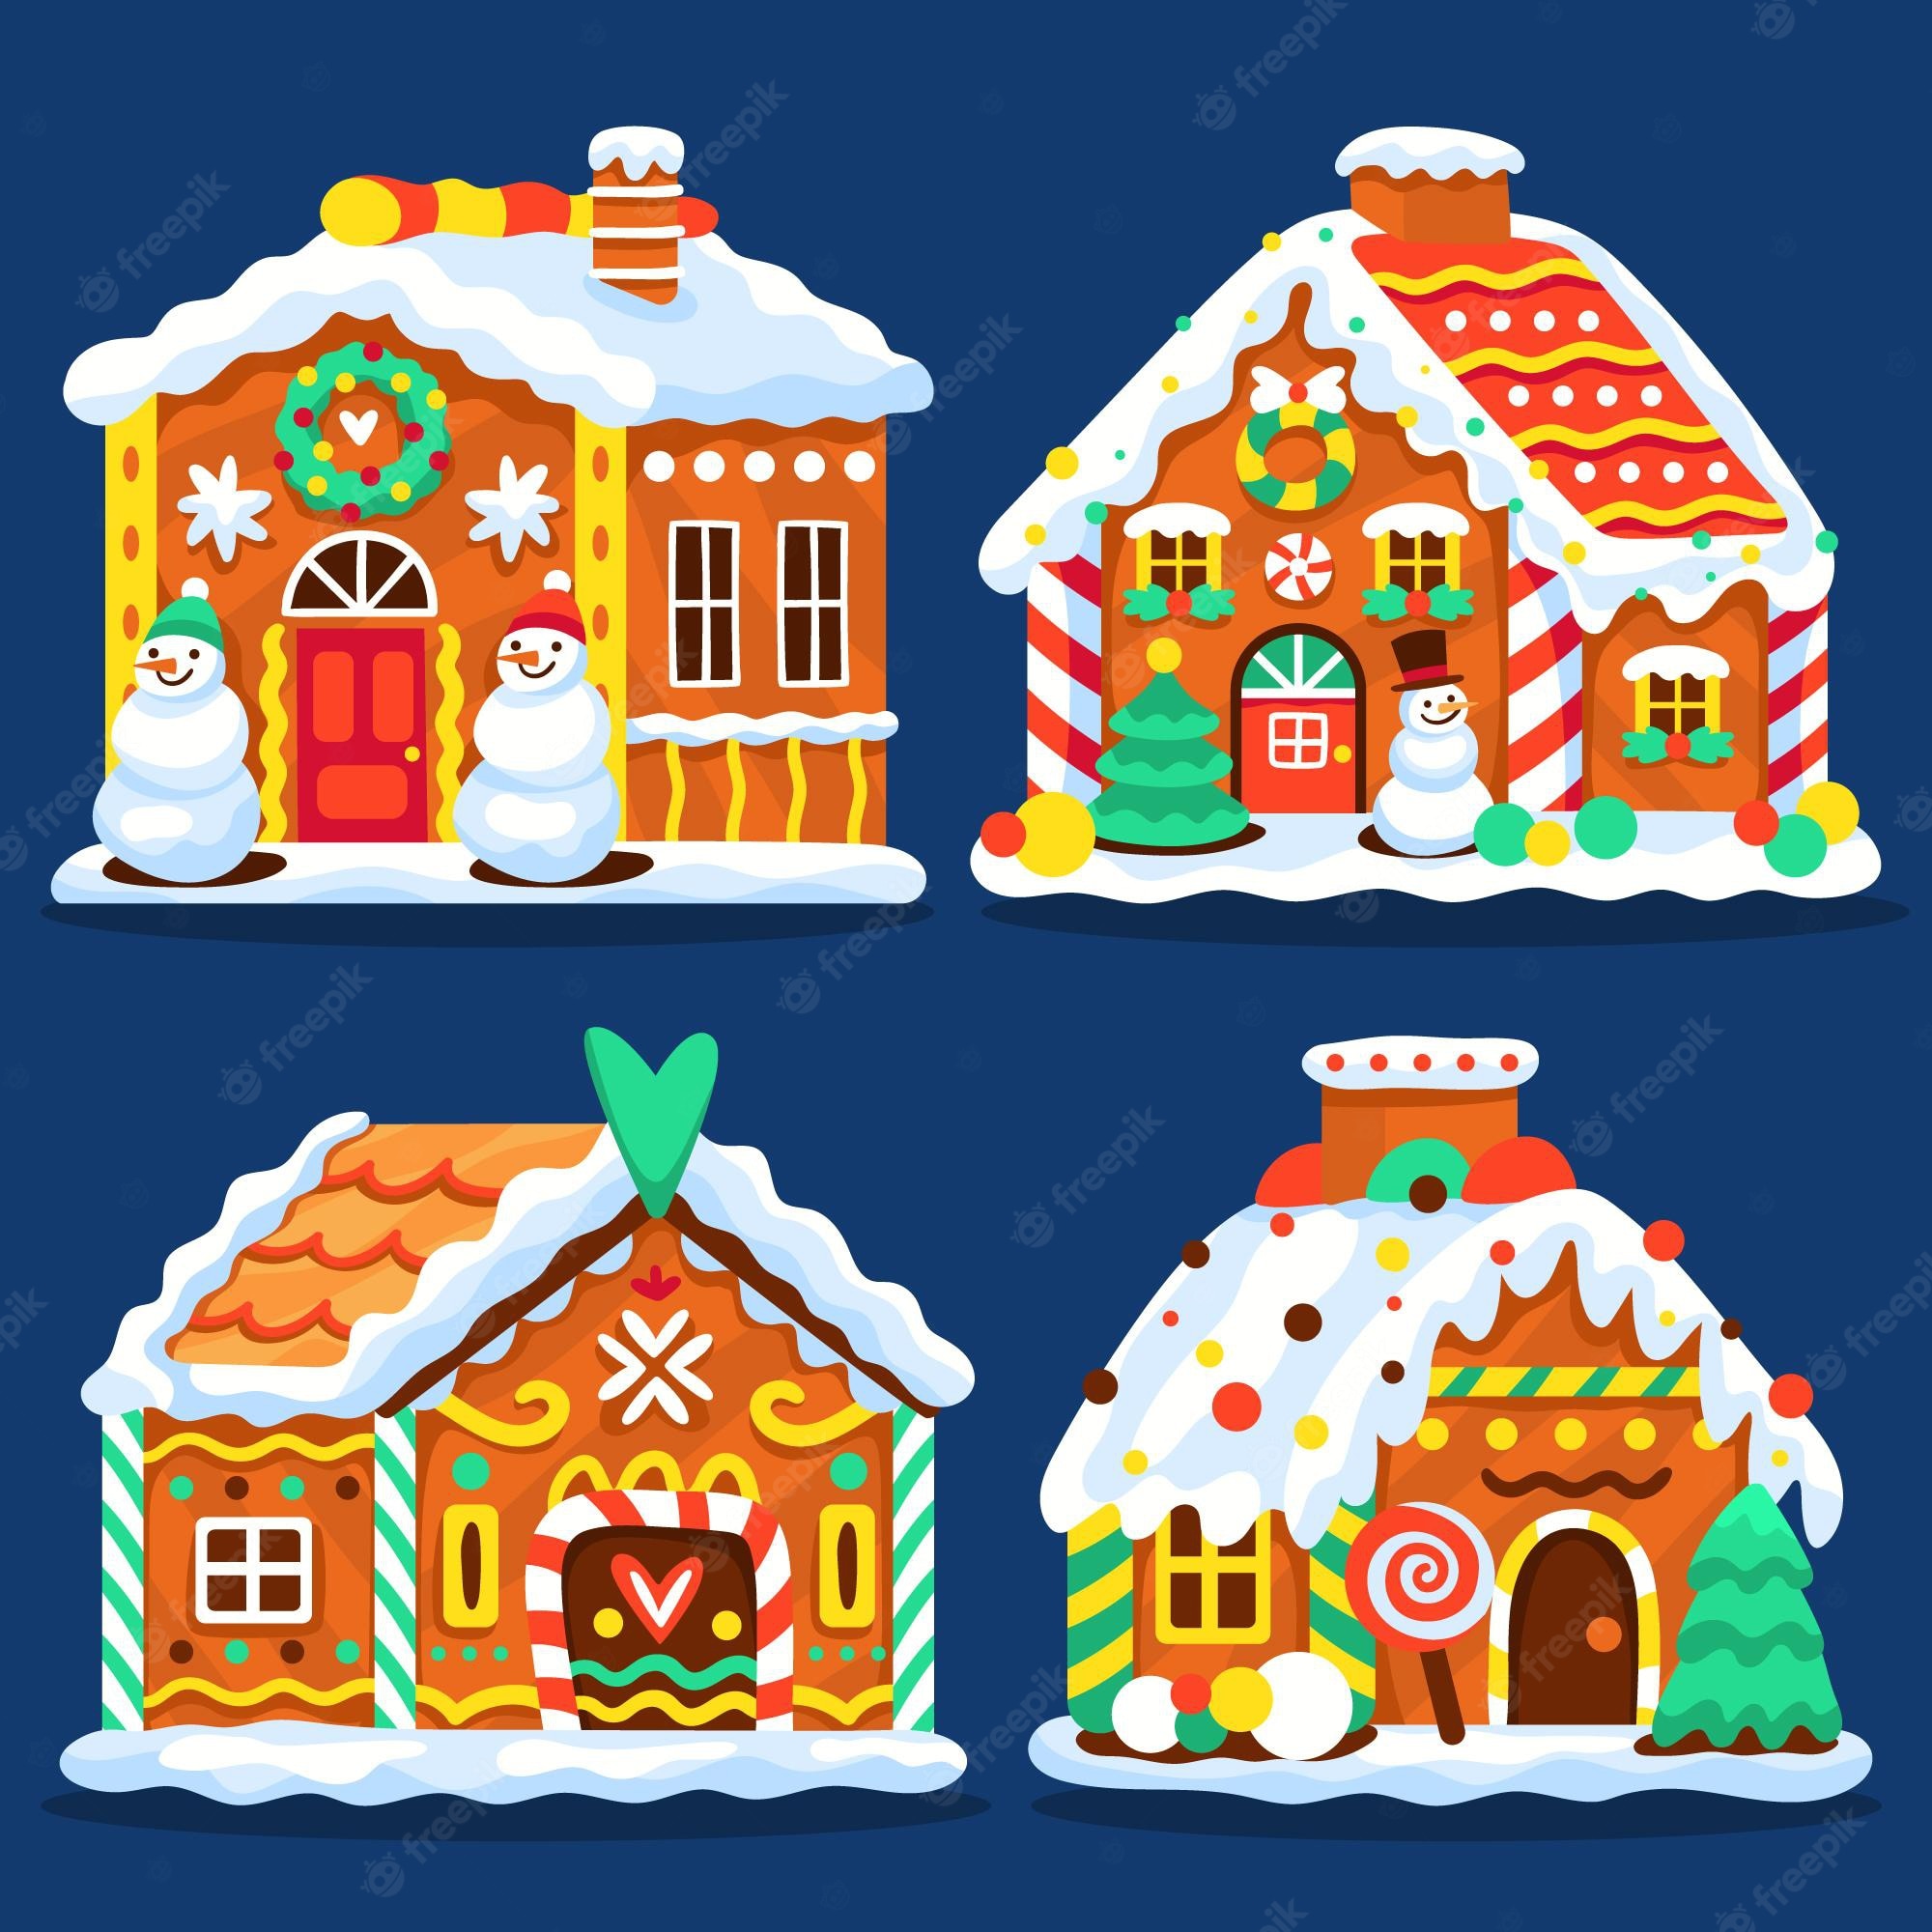 Free Gingerbread House Cliparts, Download Free Gingerbread House - Clip ...